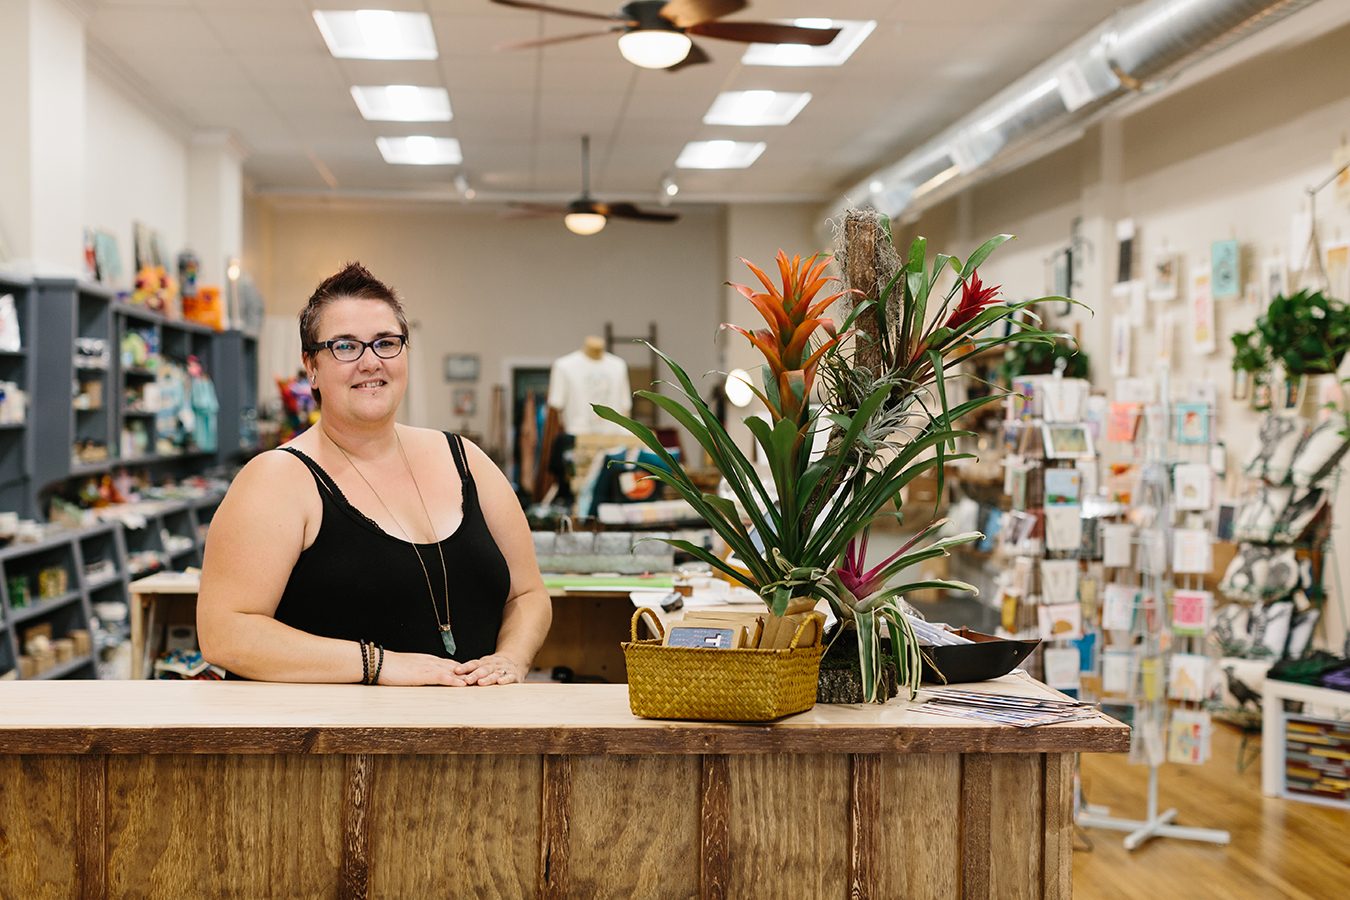 “There are so many talented people in Bloomington and the state, but it can be hard for them to get their products to market,” says Talia Halliday, owner of Gather : handmade shoppe & Co.:. “I want to help them be successful and help build a supportive community.” Gather stocks handmade goods by more than 250 makers and artists and hosts pop-up events that give the opportunity to showcase the breadth of their work and to engage with customers firsthand. | Photo by Anna Powell Teeter